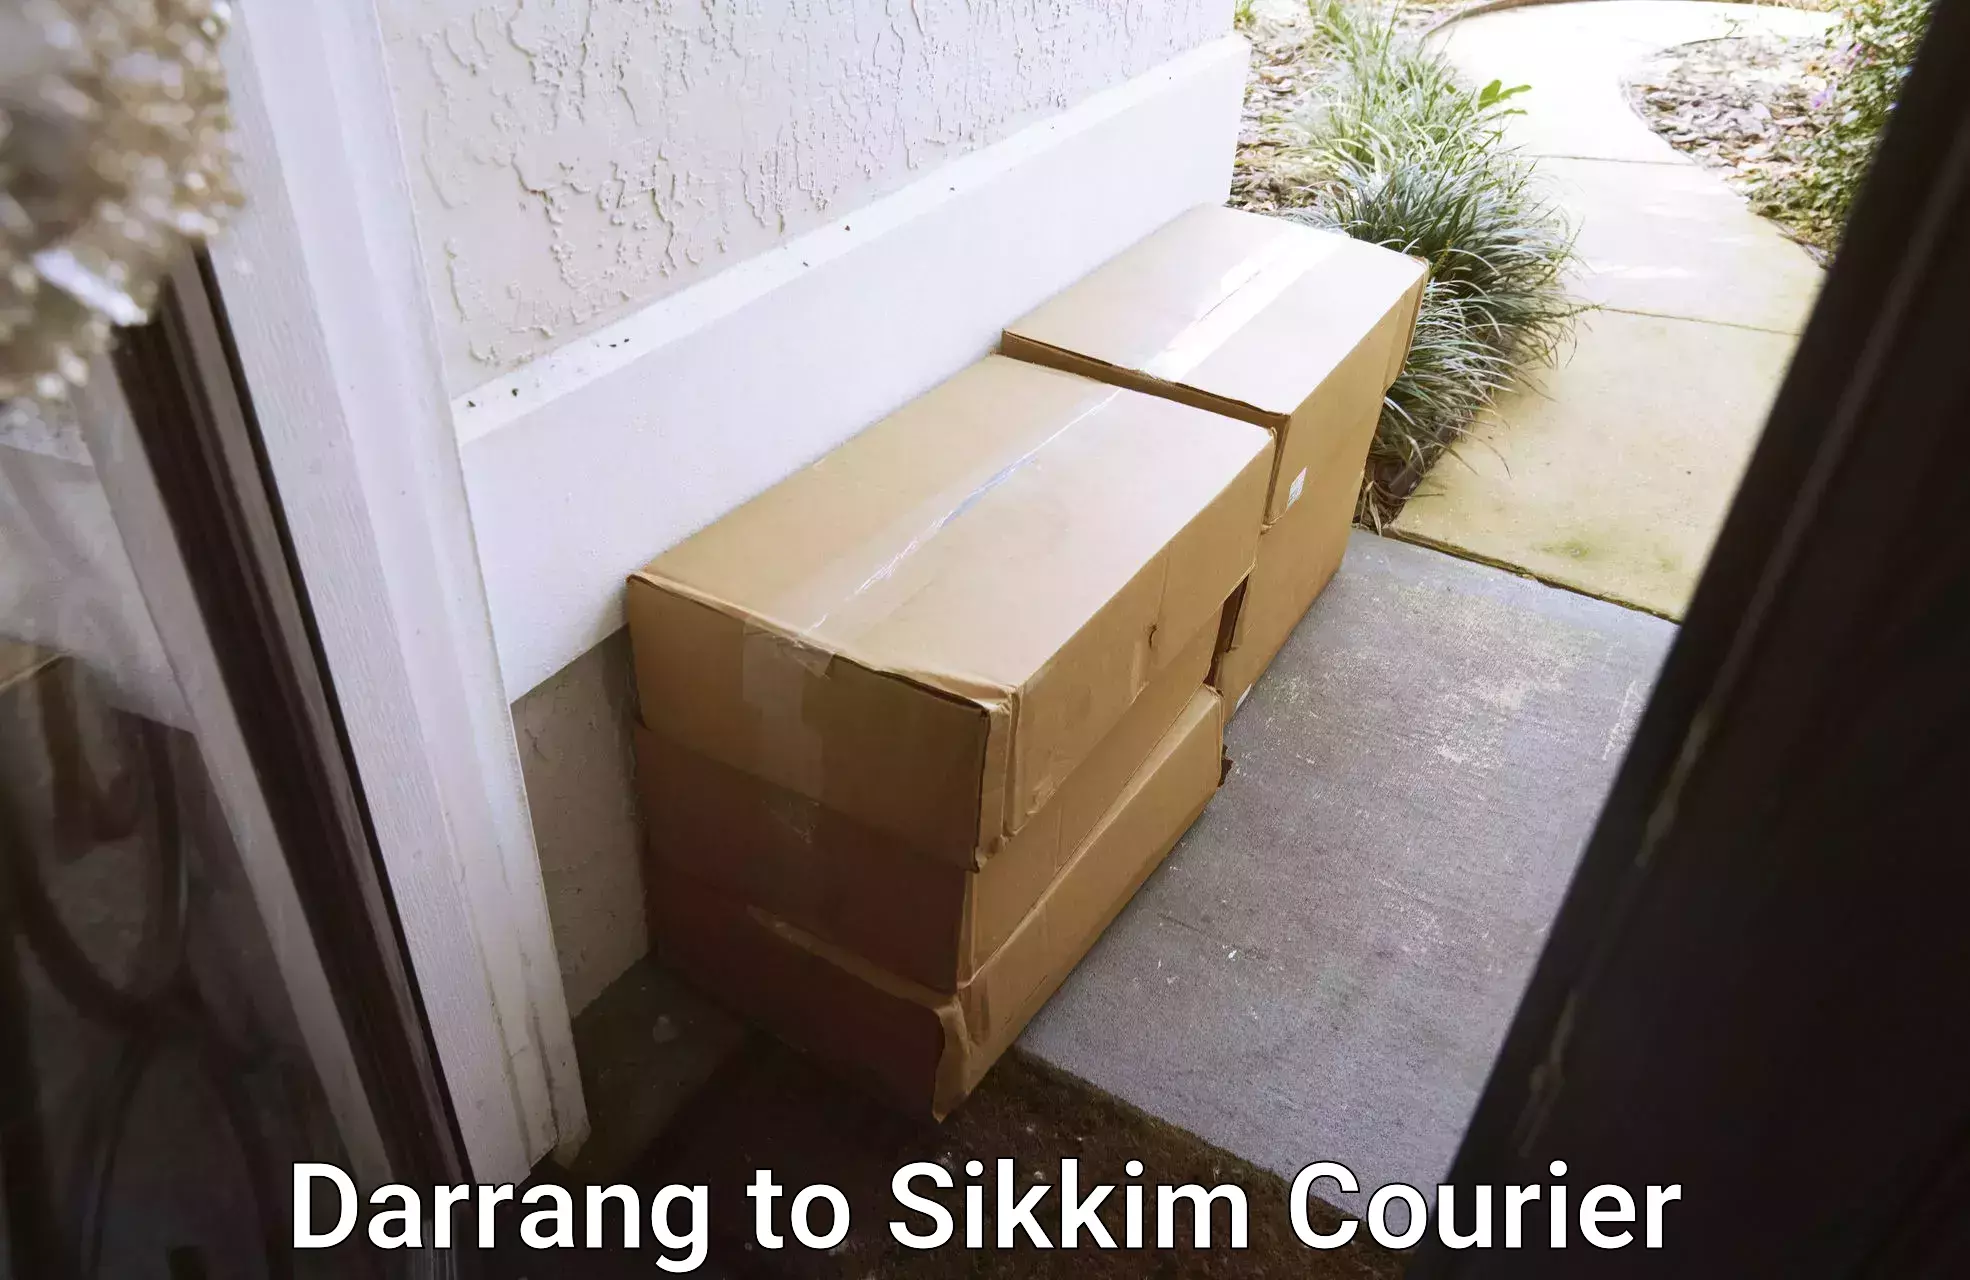 On-call courier service Darrang to Sikkim